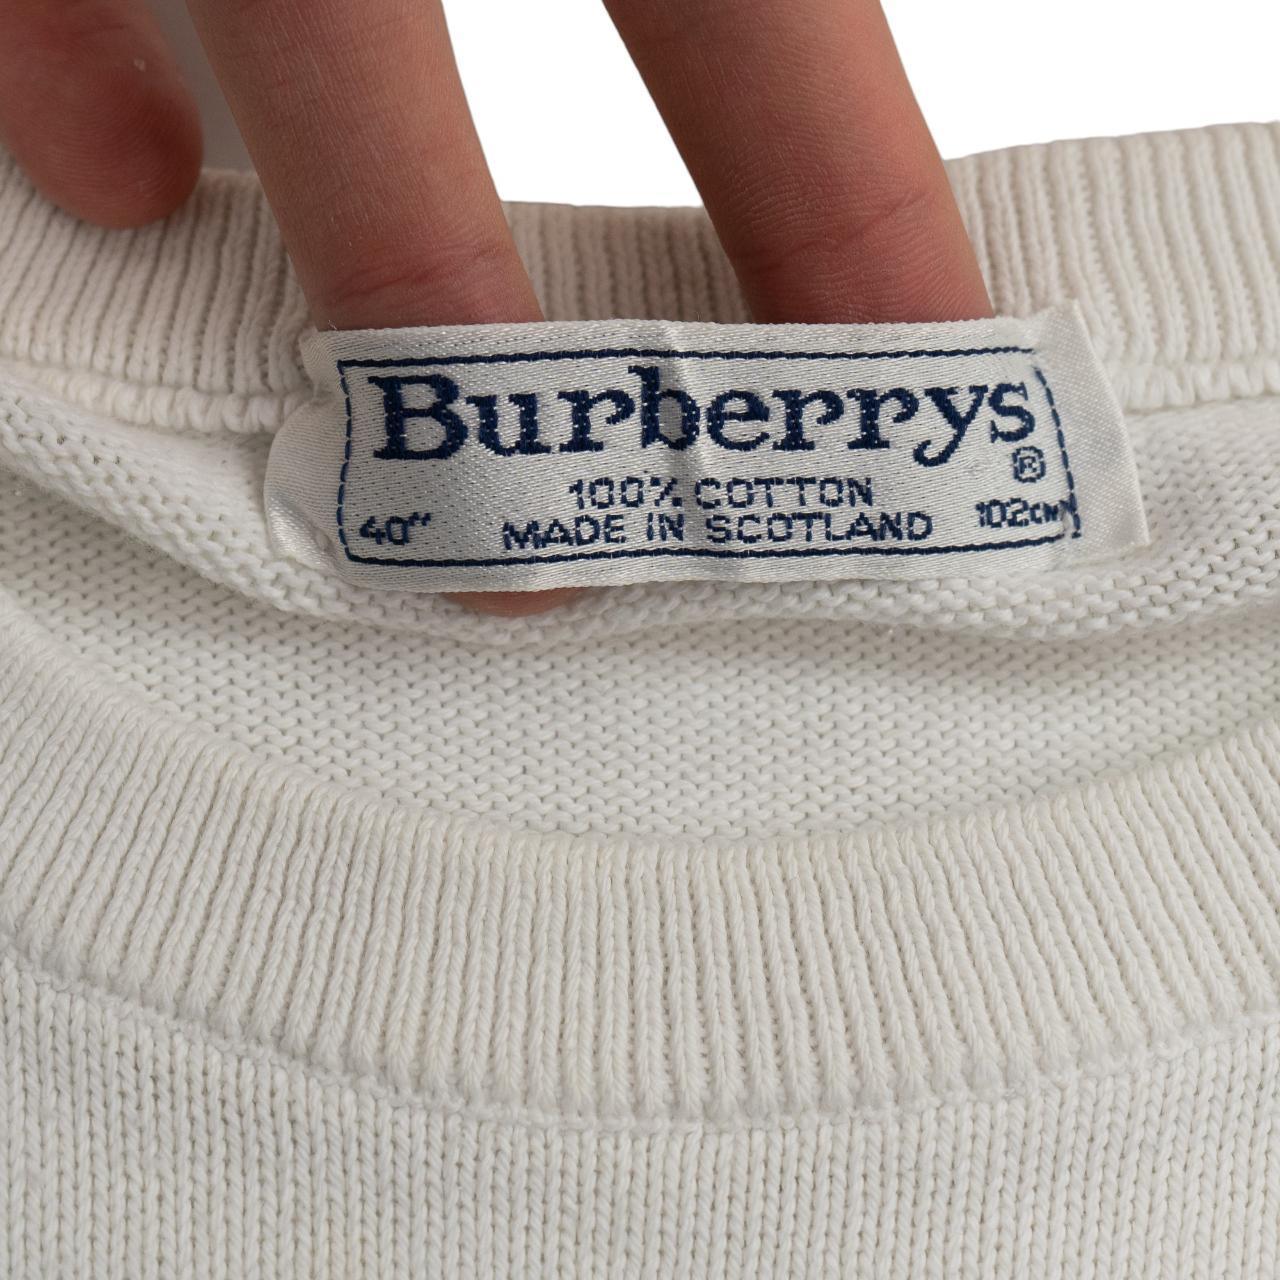 Vintage Burberry Knitted Jumper Size S - Known Source